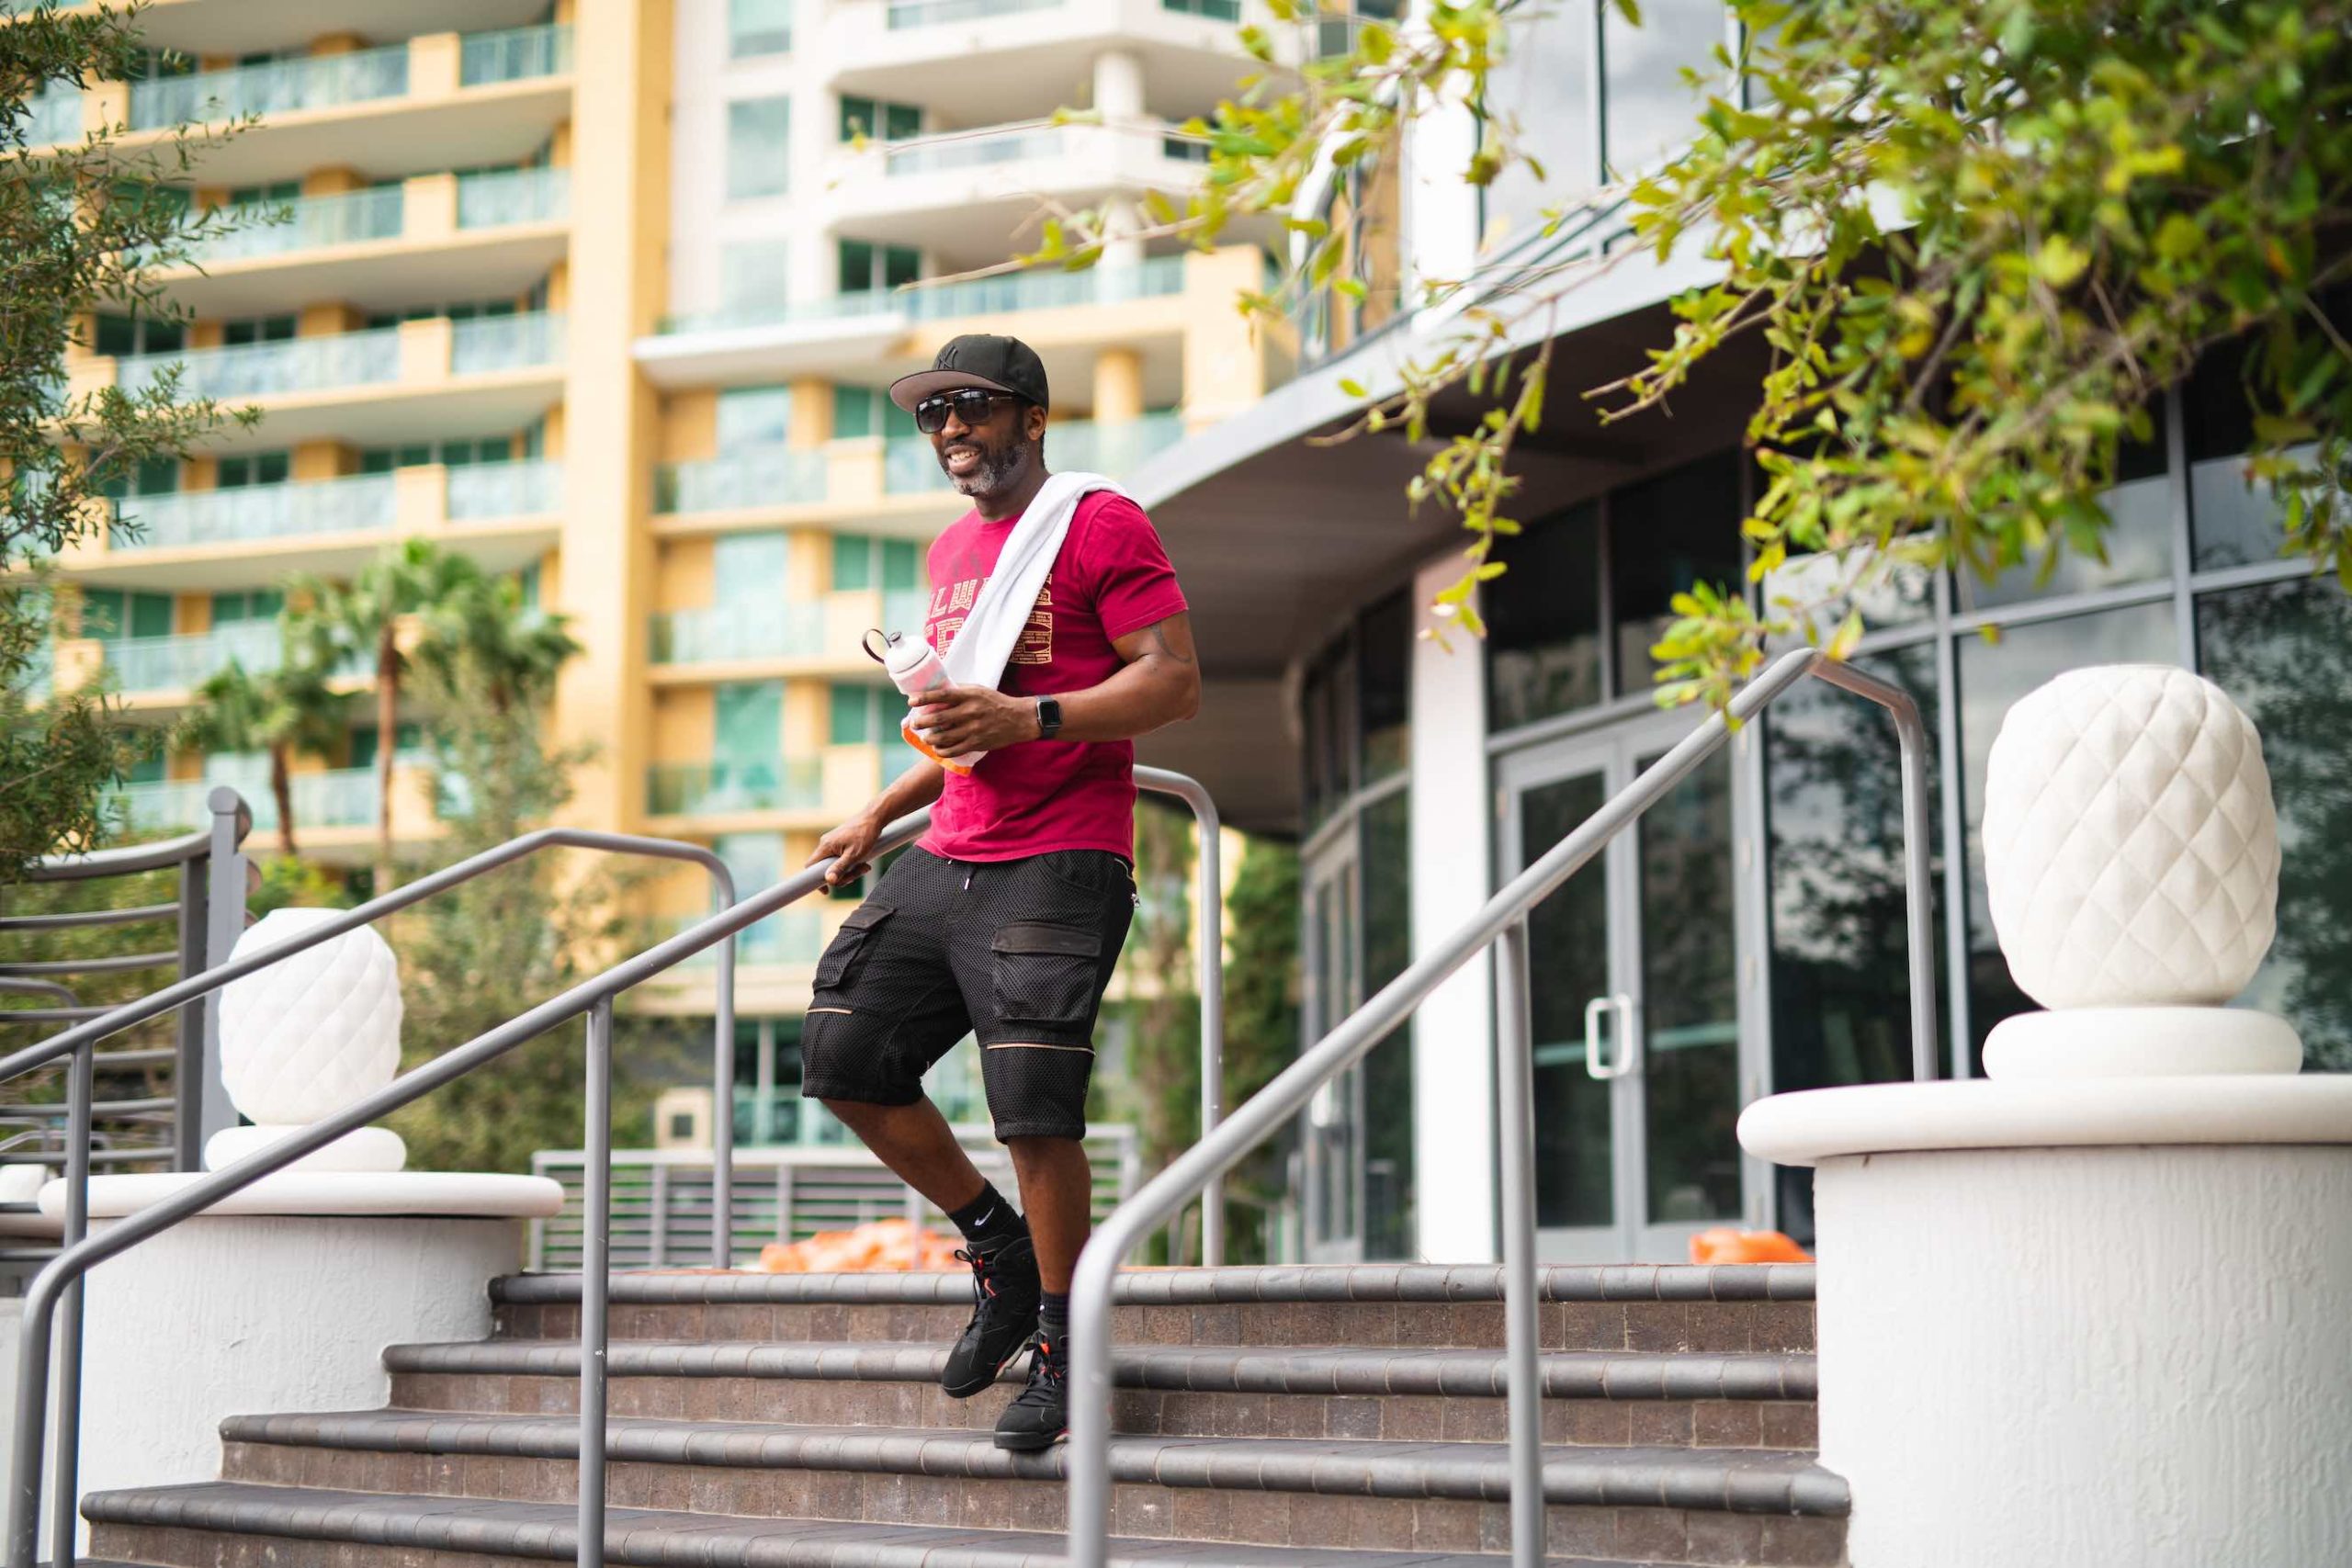 Freebird Real Estate East Fort lauderdale African American man wearing black cap, shades, salt and pepper goatee, red shirt and black shorts walking down steps holding a water bottle